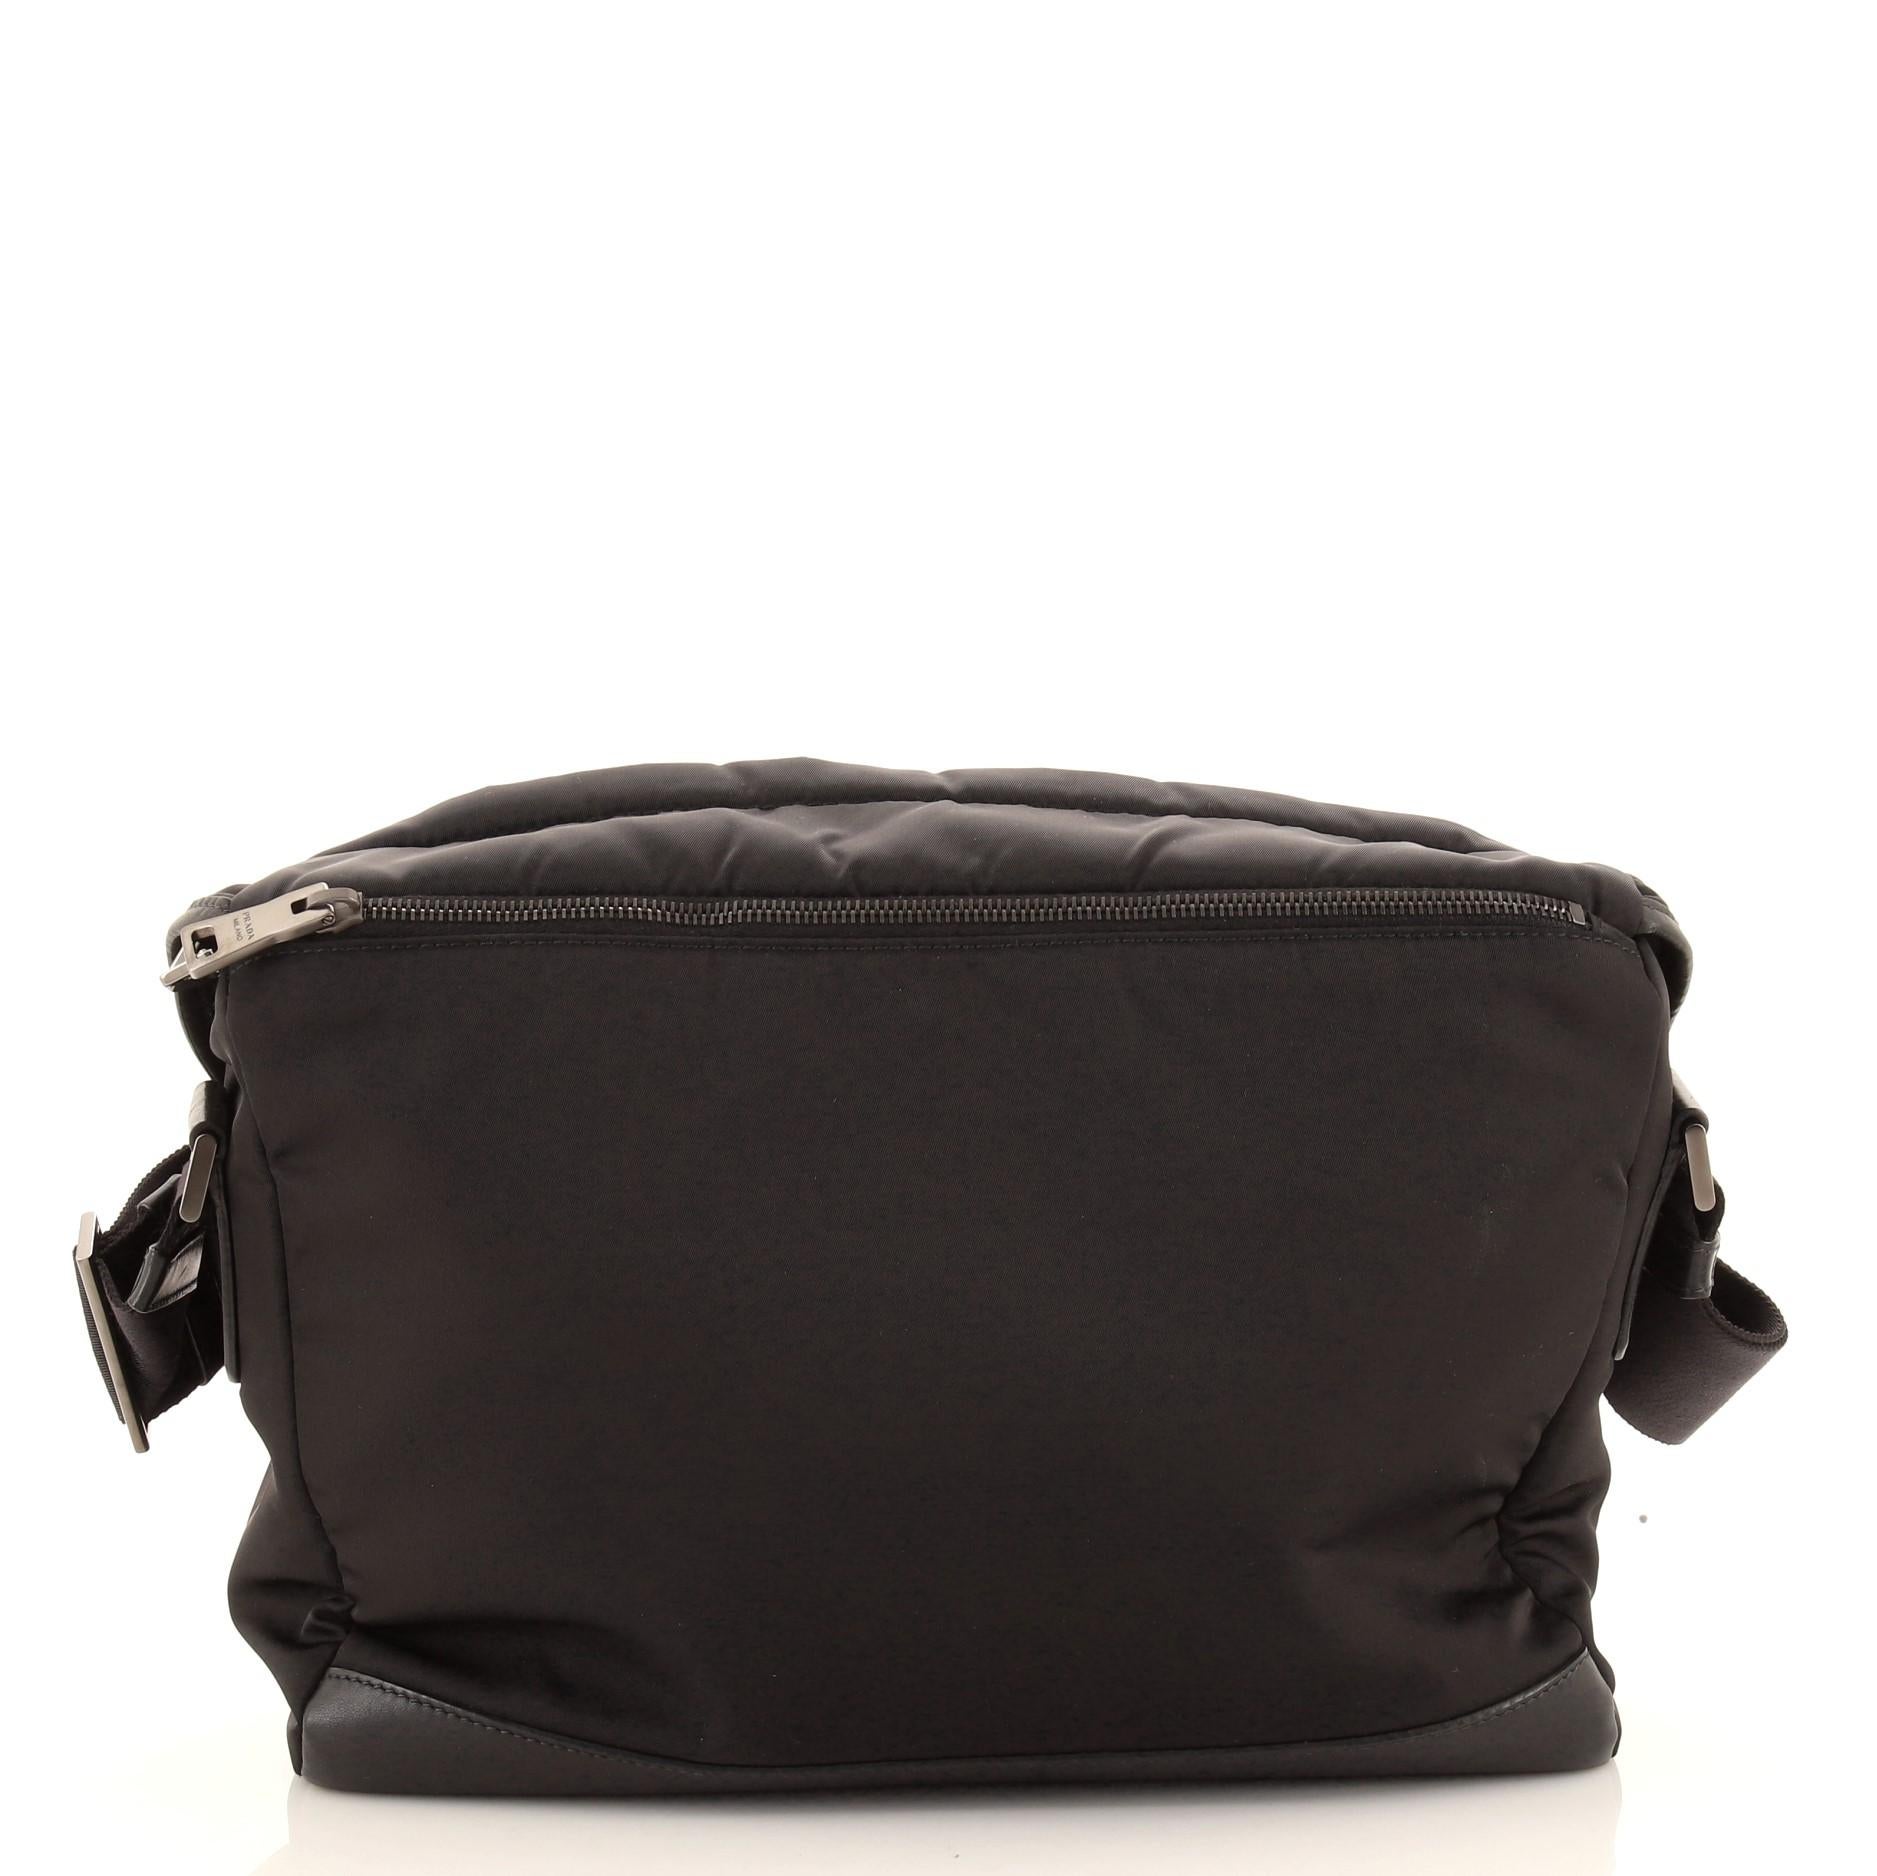 Prada Double Buckle Flap Large Messenger Bag features black durable nylon with fine leather trim details and an adjustable long strap that can be worn over the shoulder or cross-body for hands-free comfort. Back zip pocket, one zipped interior